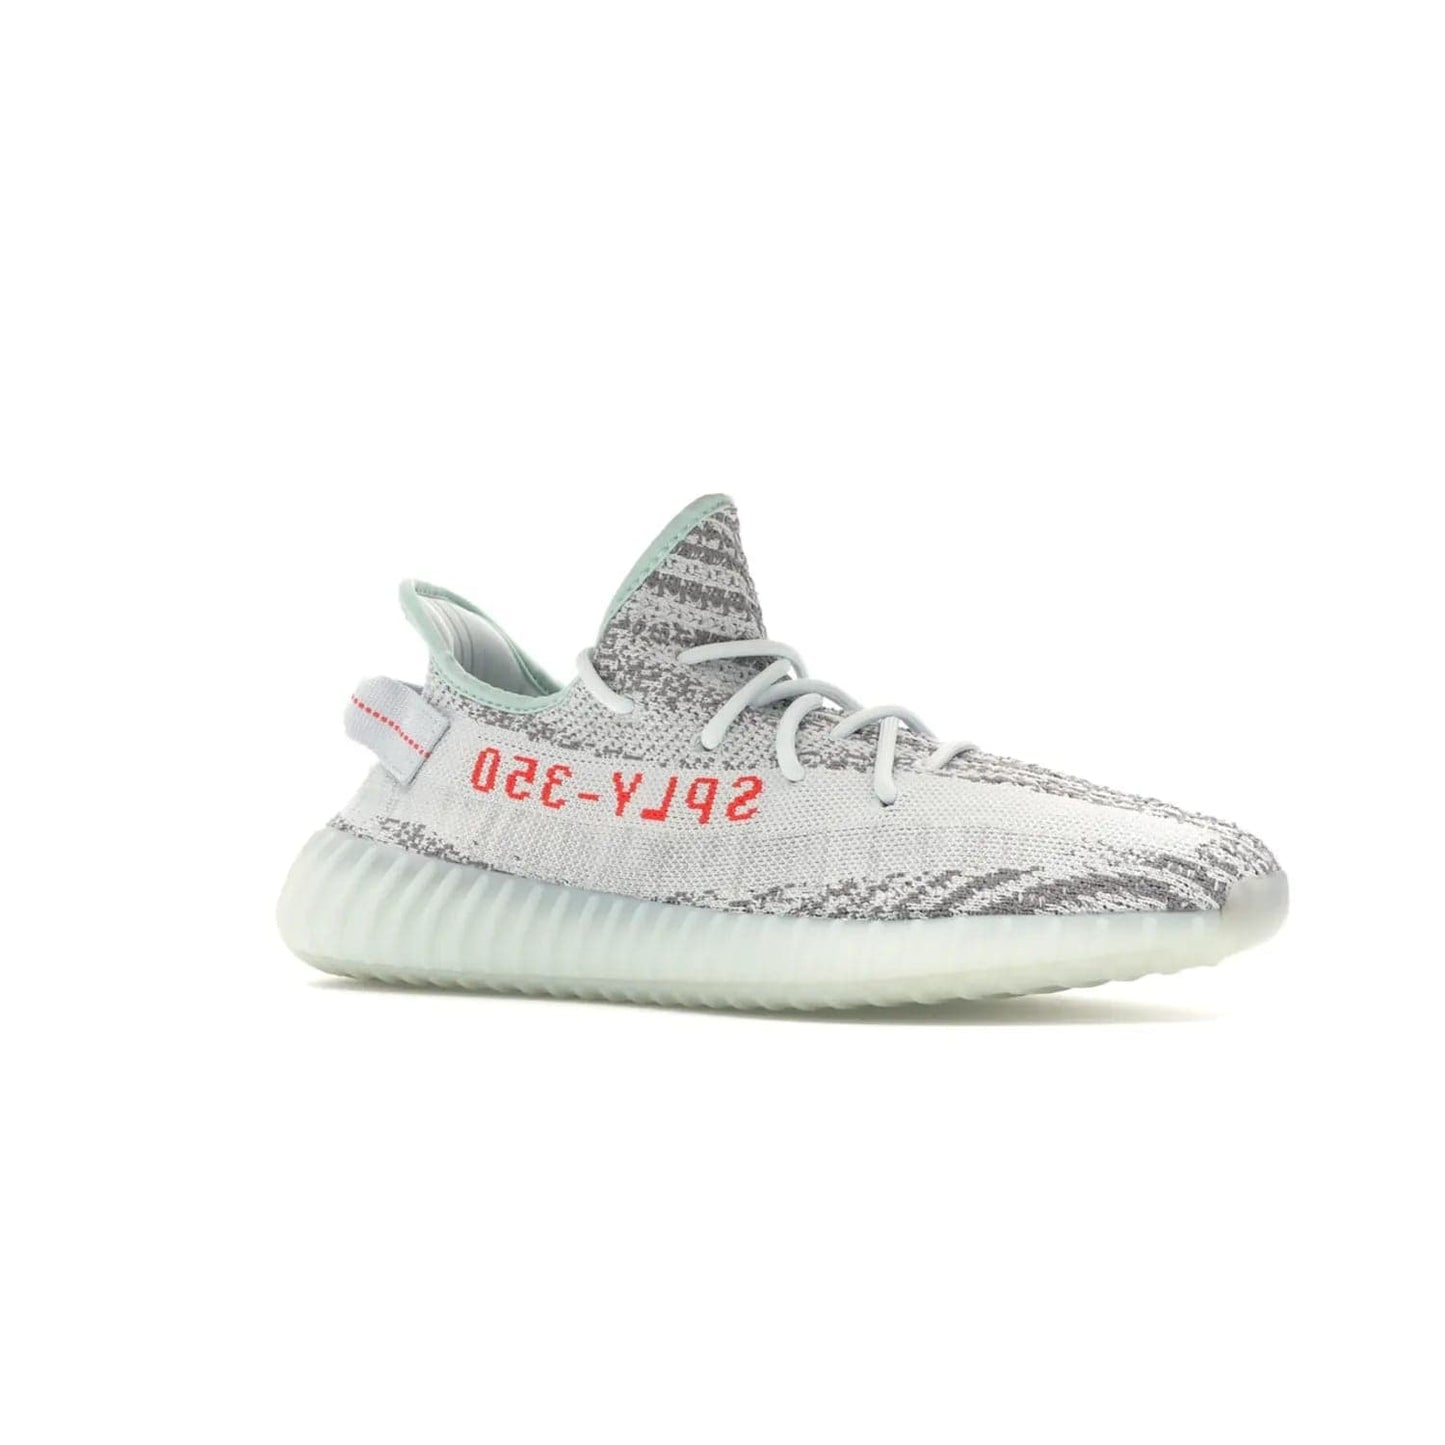 adidas Yeezy Boost 350 V2 Blue Tint - Image 4 - Only at www.BallersClubKickz.com - The adidas Yeezy Boost 350 V2 Blue Tint merges fashion and functionality with its Primeknit upper and Boost sole. Released in December 2017, this luxurious sneaker is perfect for making a stylish statement.